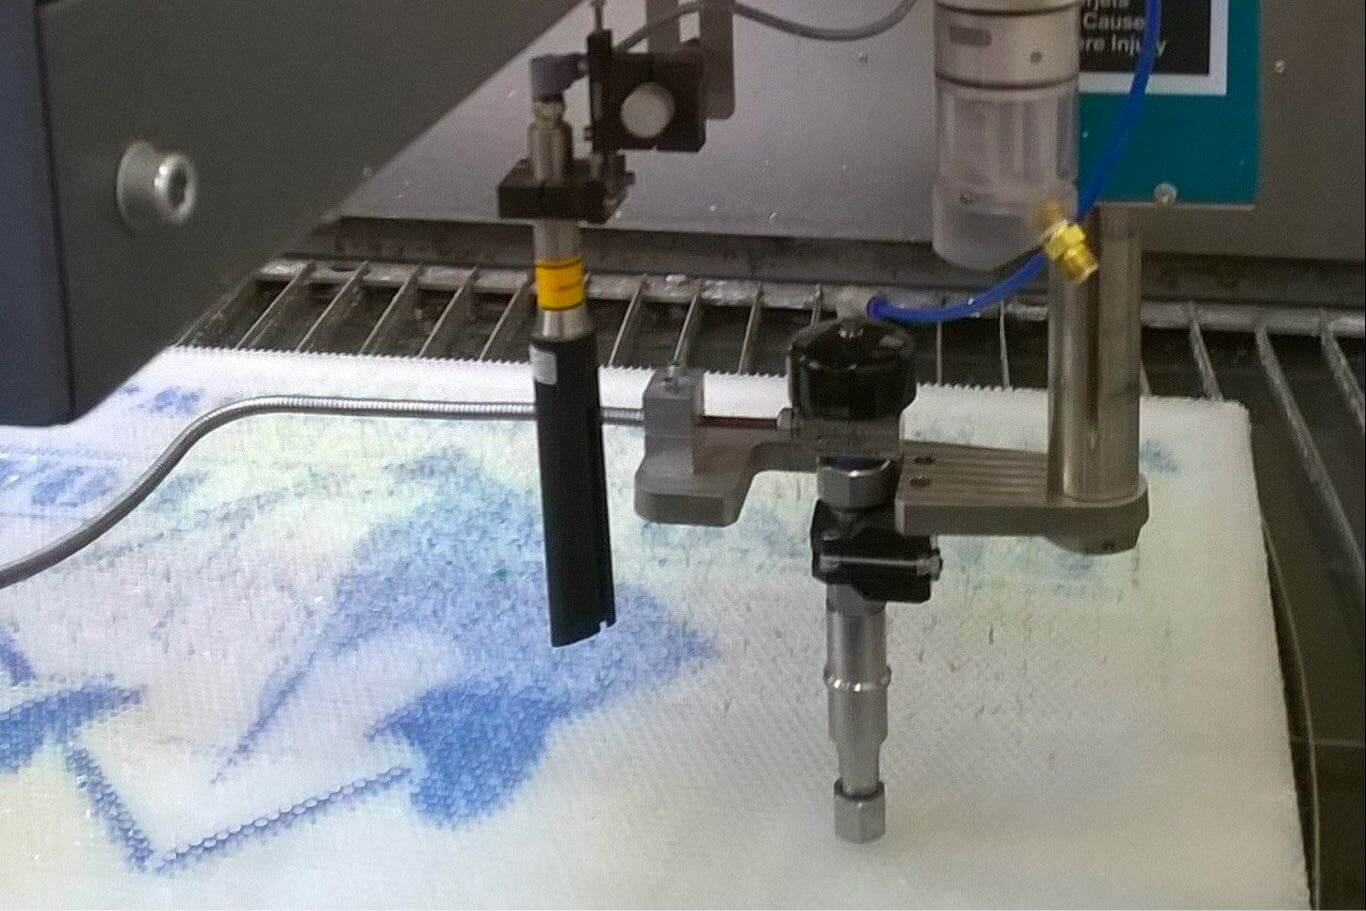 Our water jet cutting process explained